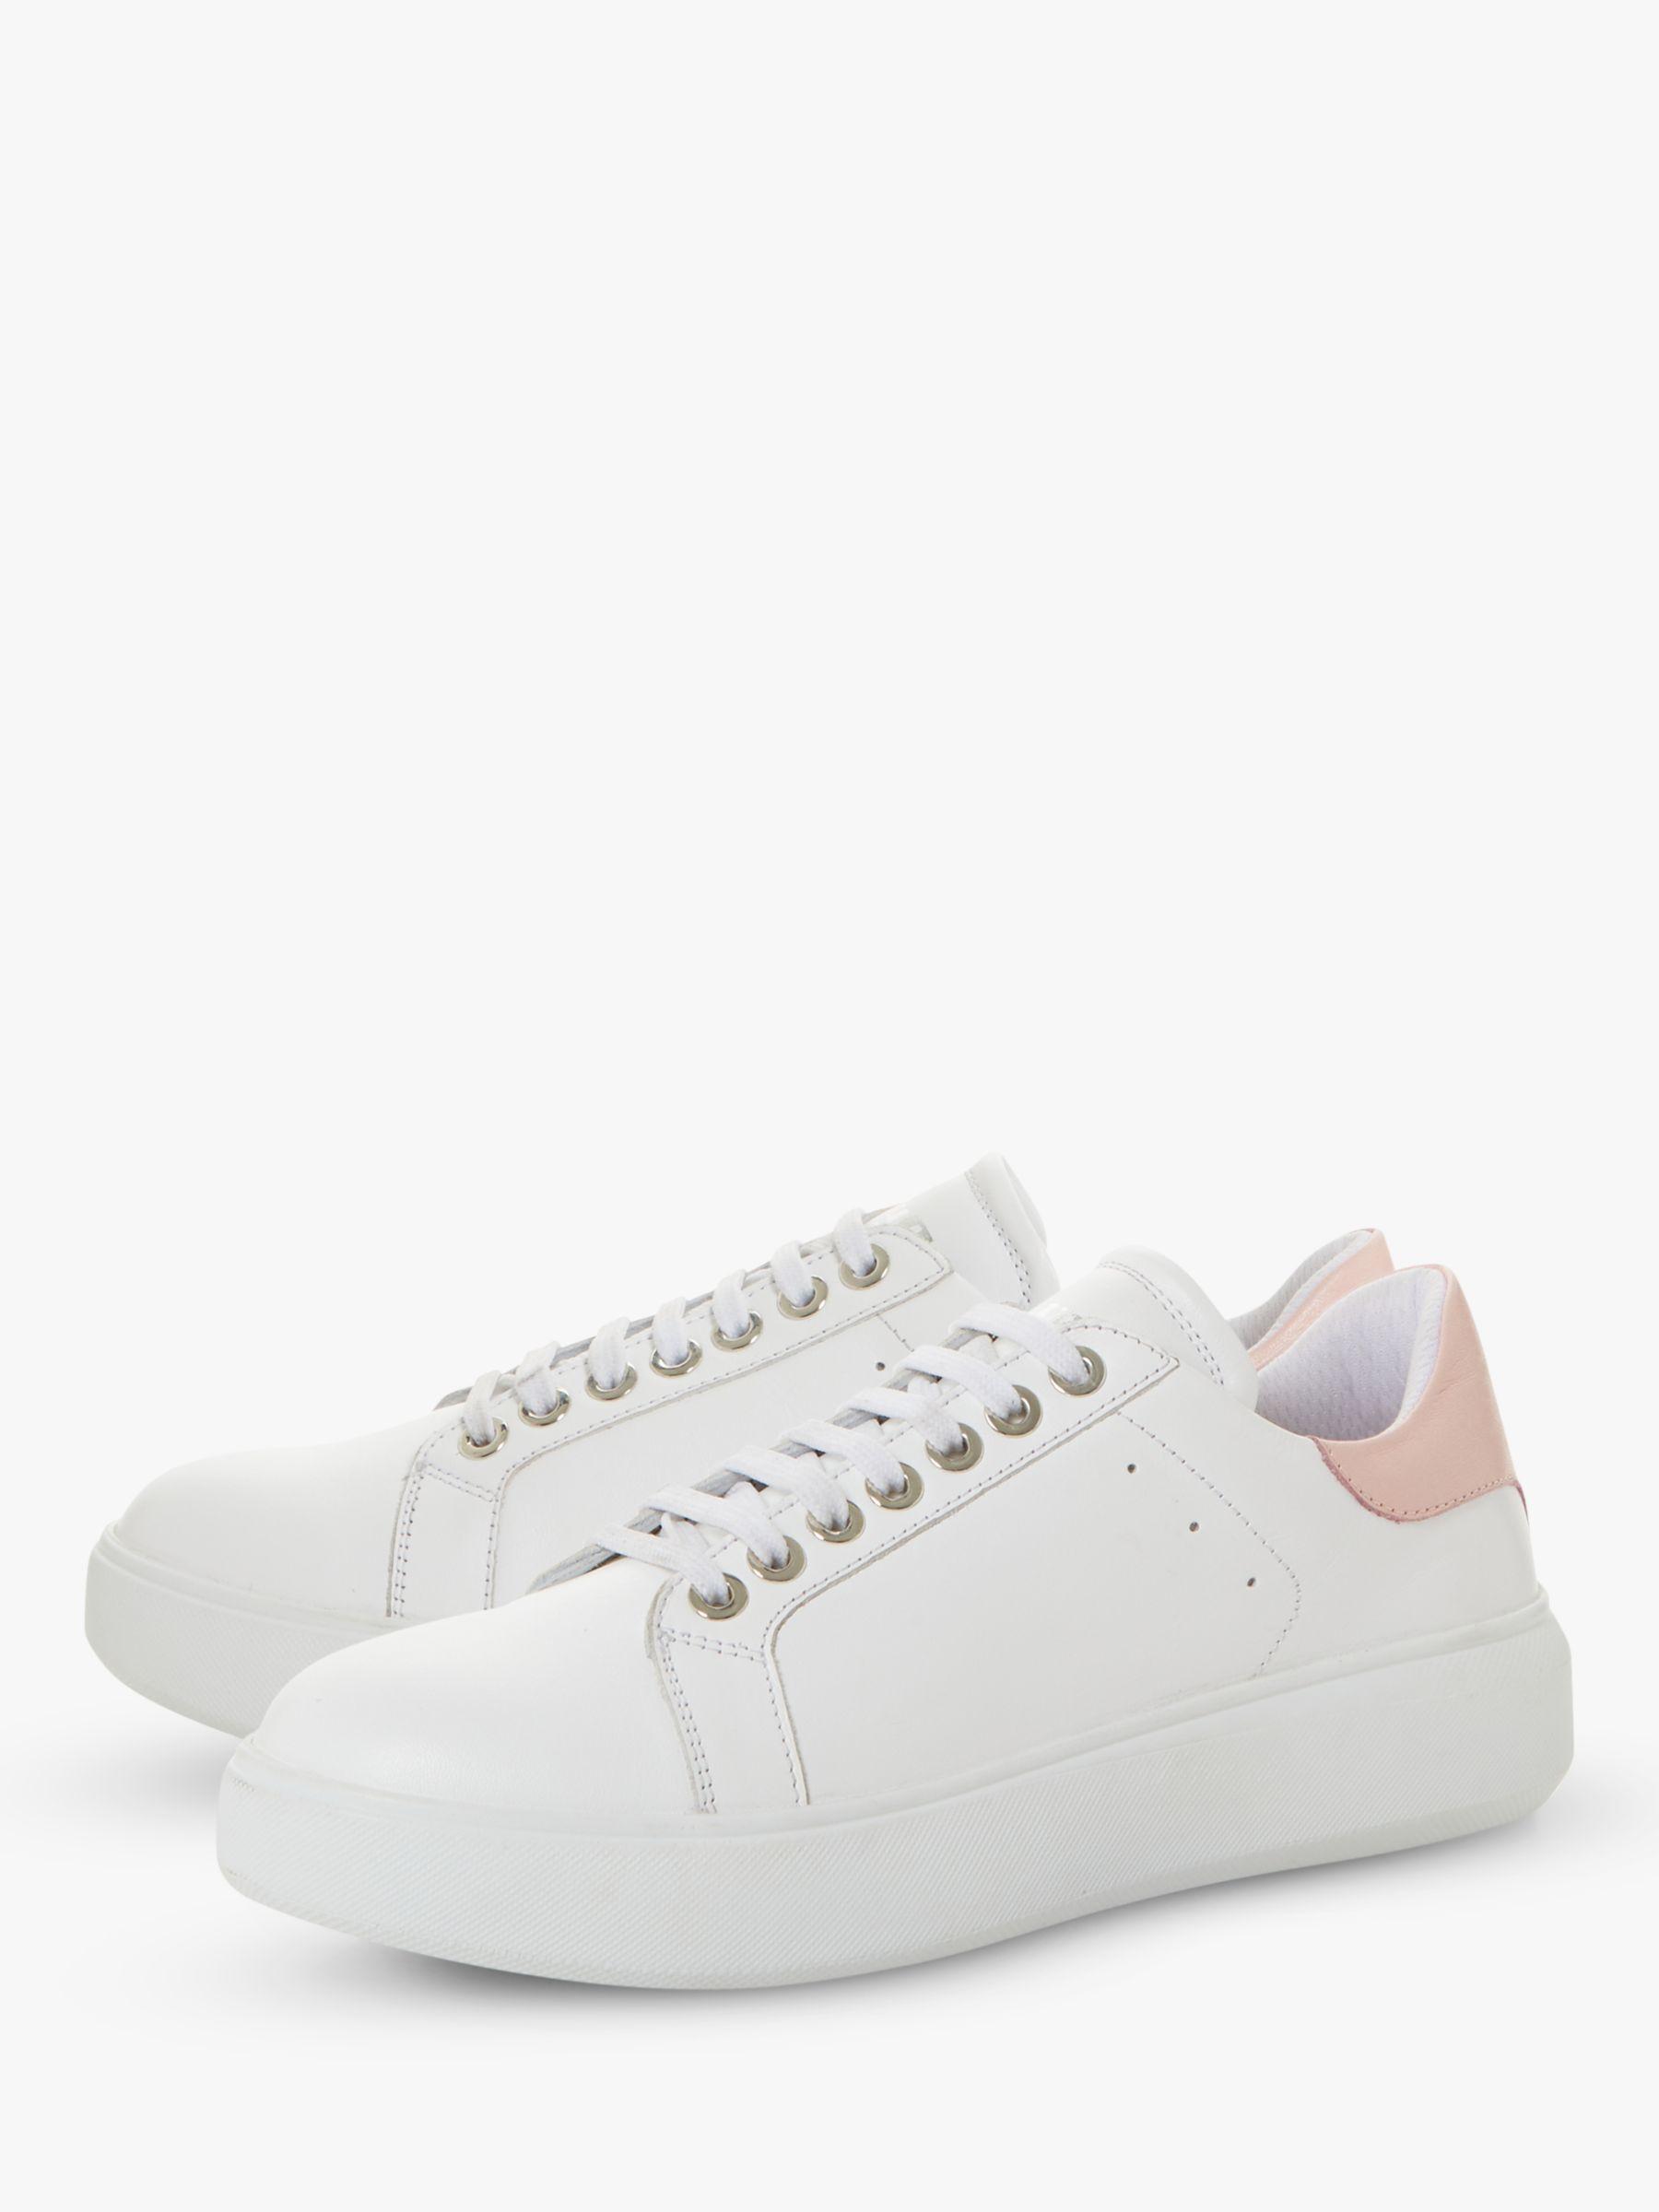 dune pink trainers